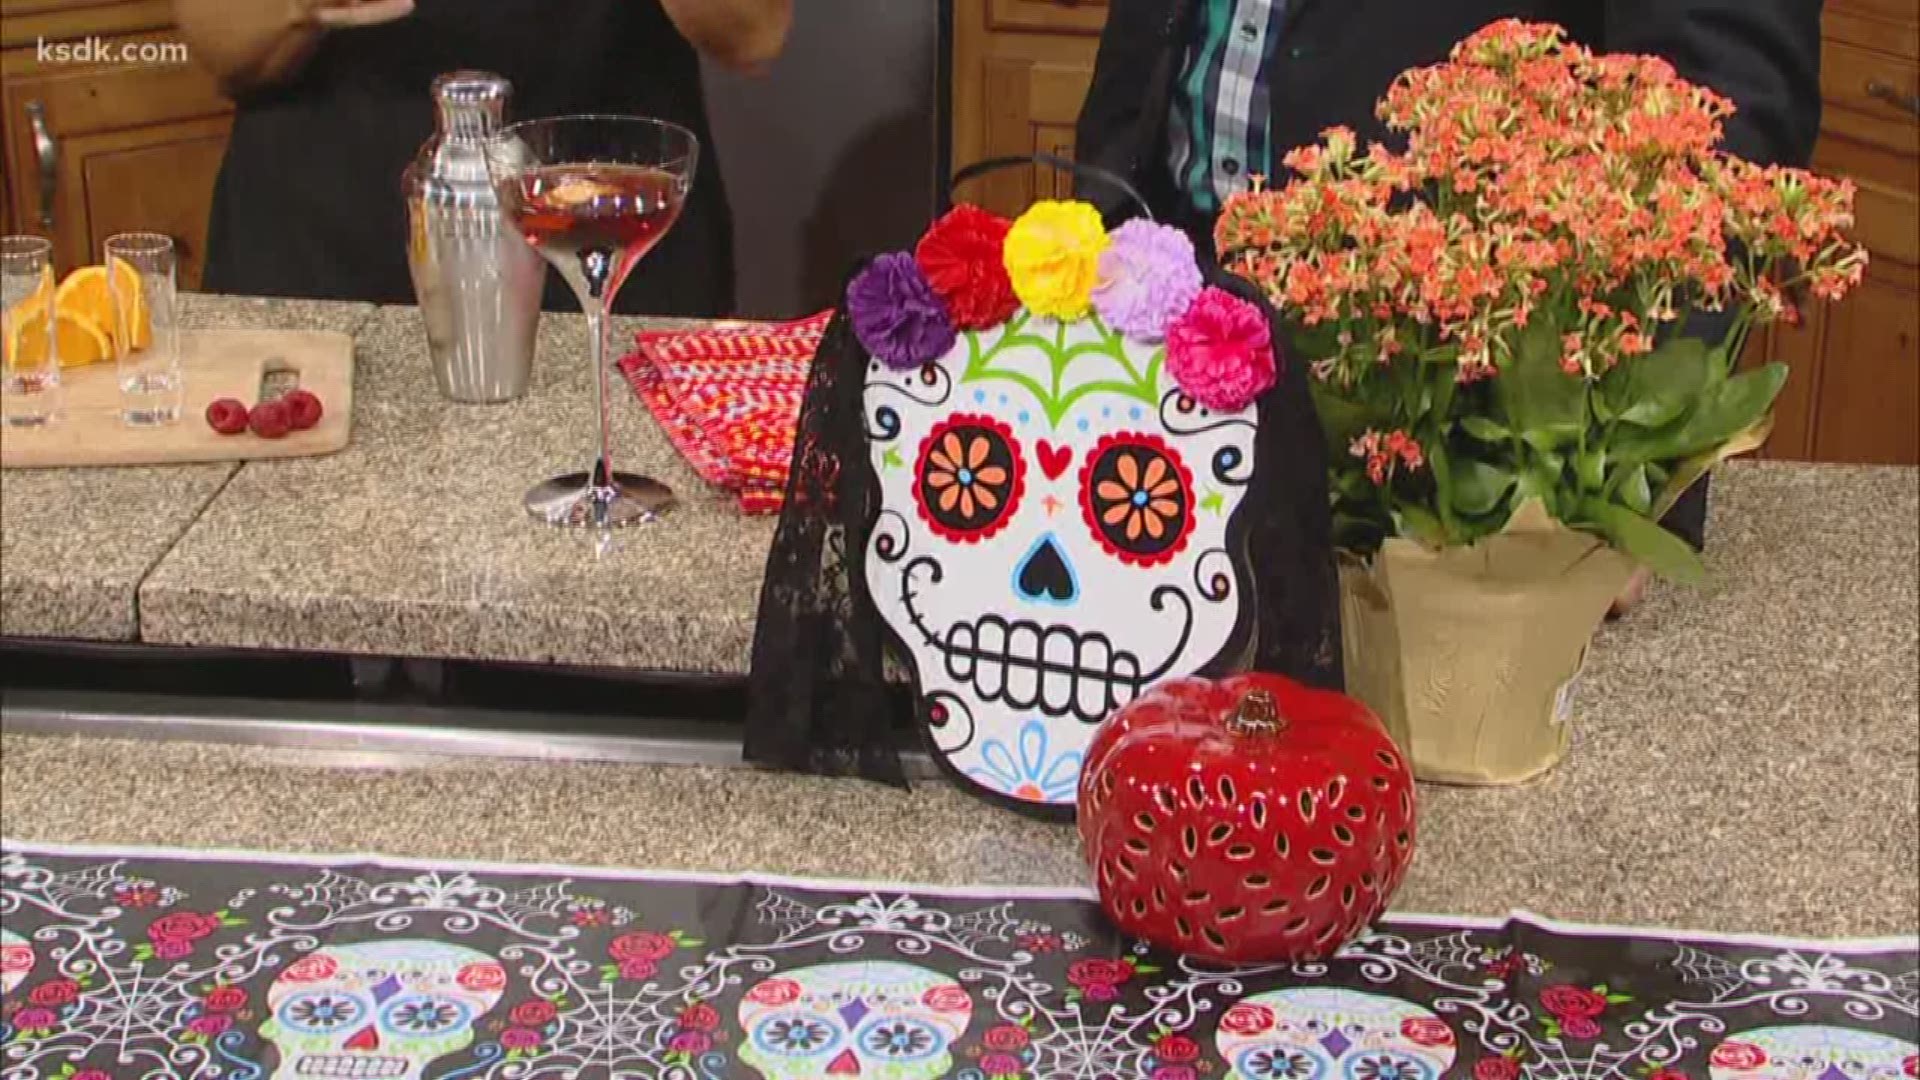 Pia Reinhold shared a recipe for a cocktail that is great for Halloween and can even make a fun trick-or-treating alternative for adults.